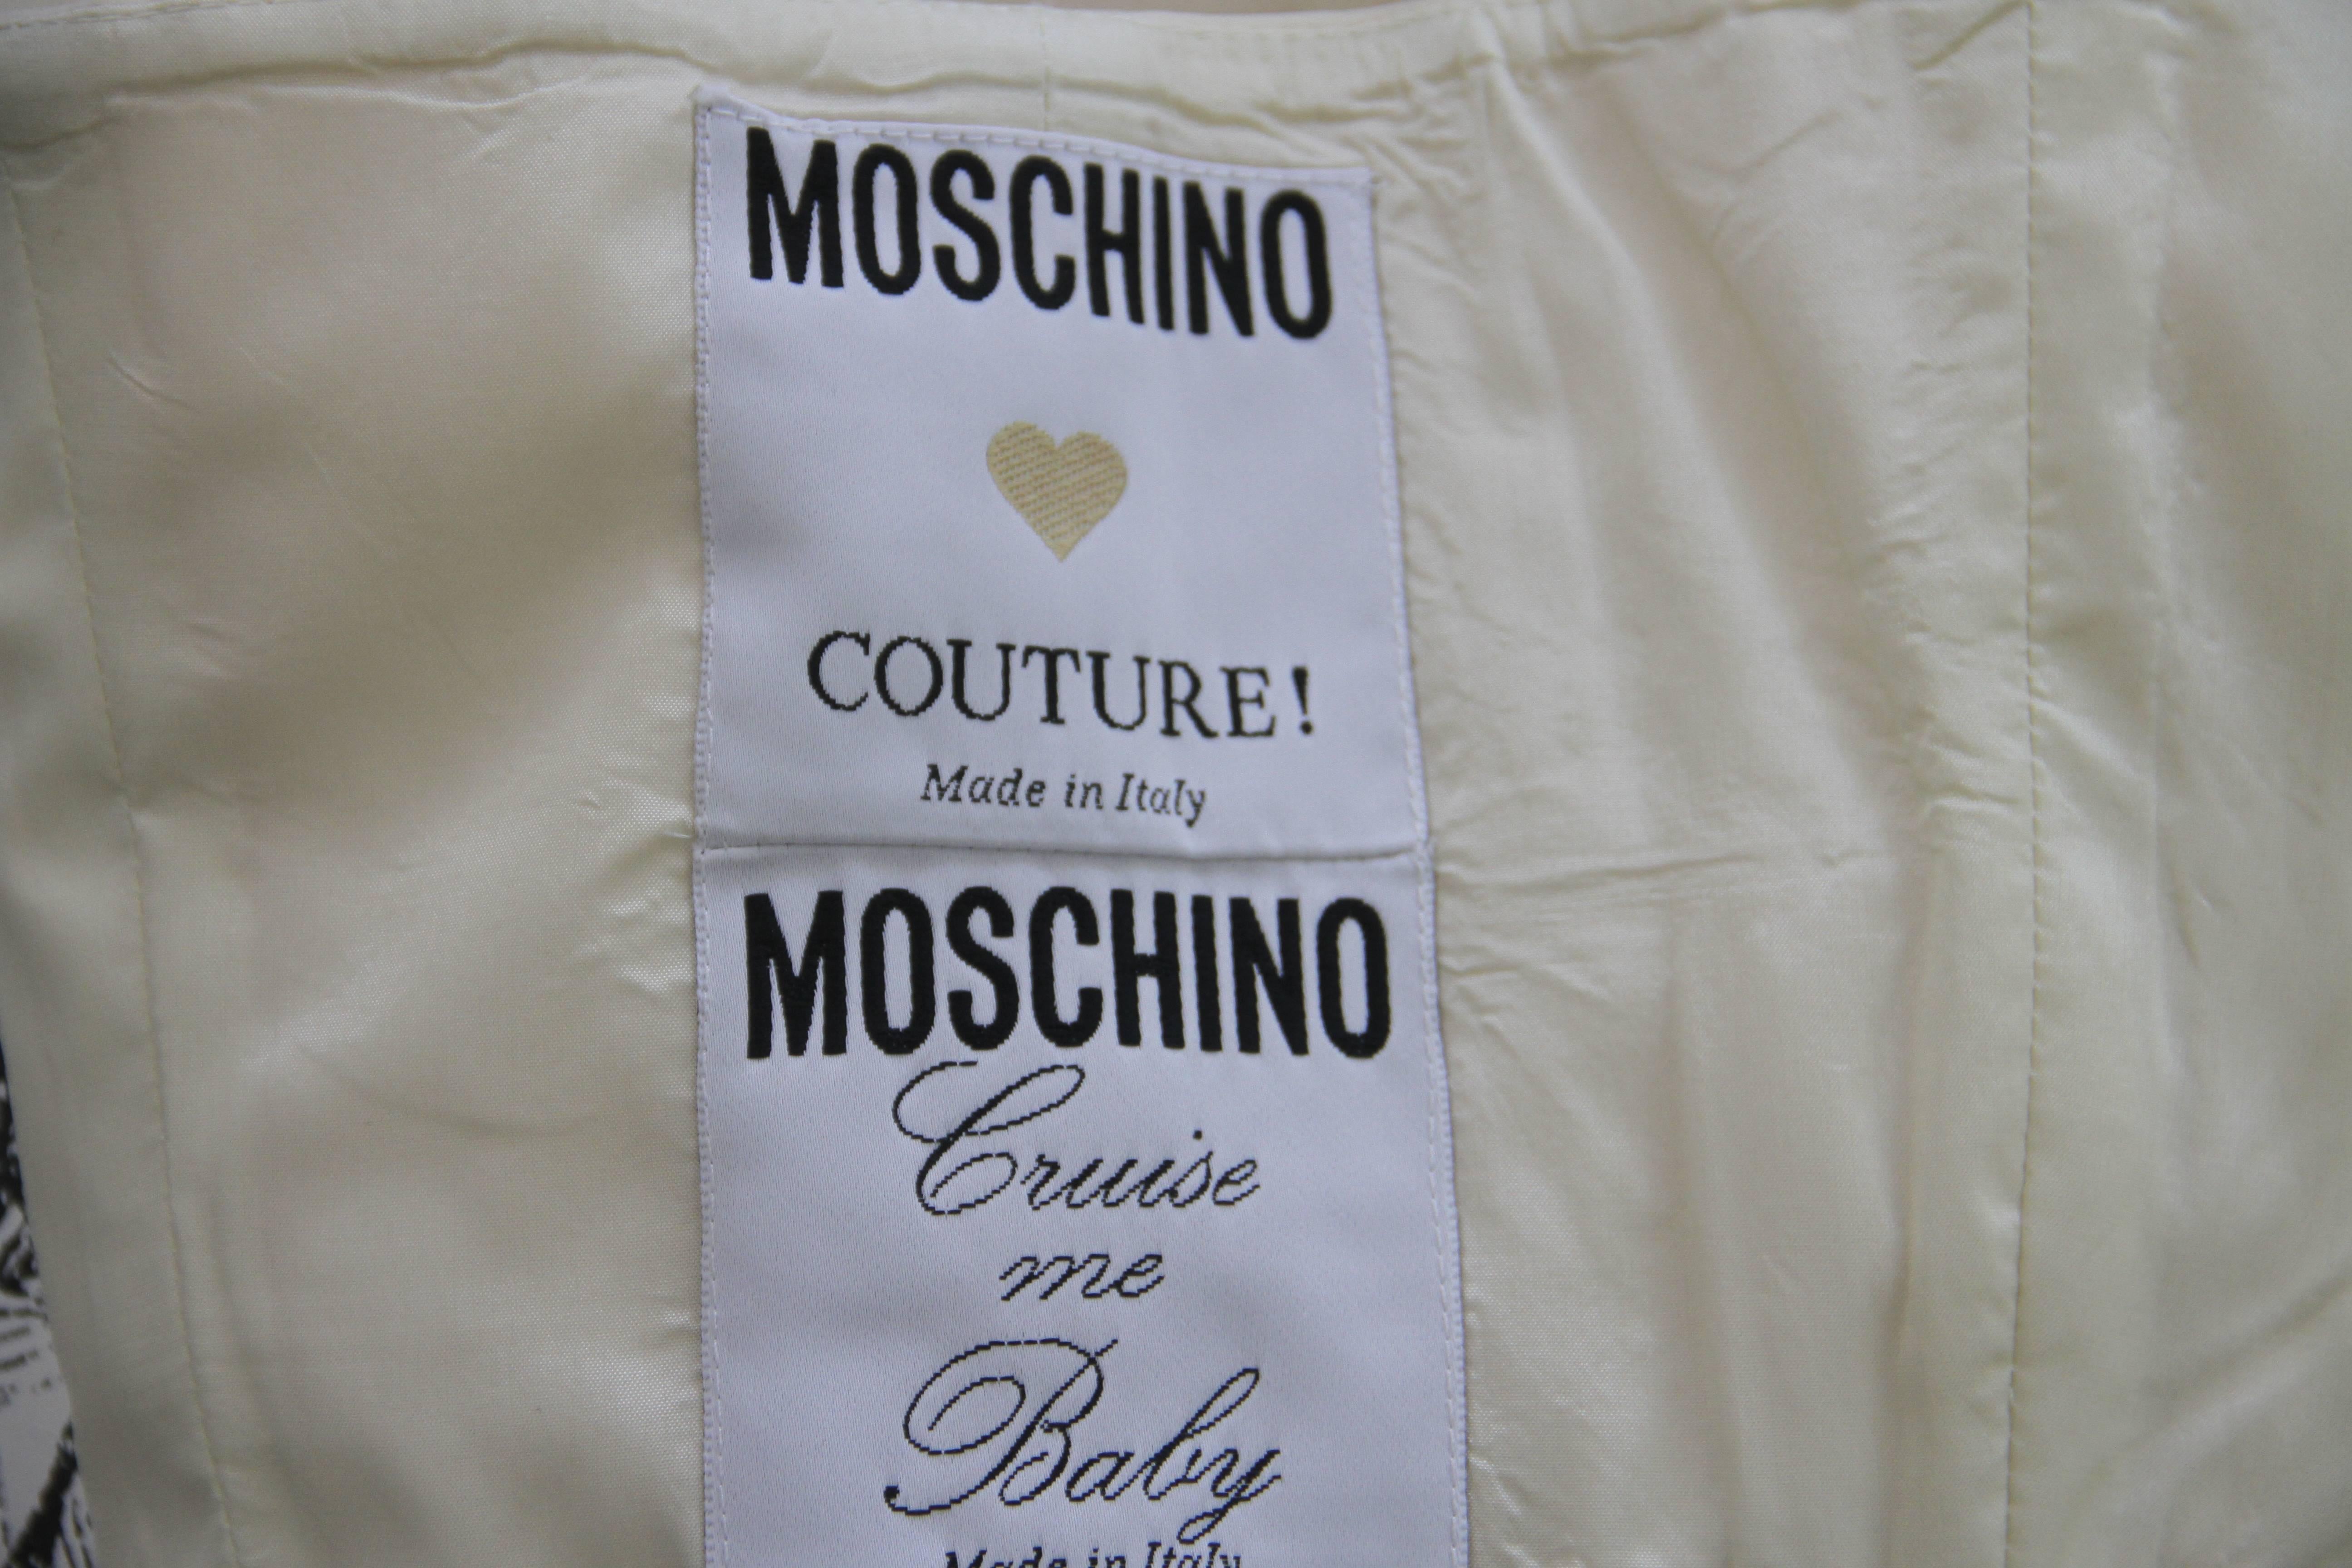 Moschino Couture Cruise Me Baby silk blend waistcoat vest from the early 1990's.

Marked an Italian size 42.

Manufacturer - Aeffe S.p.a.